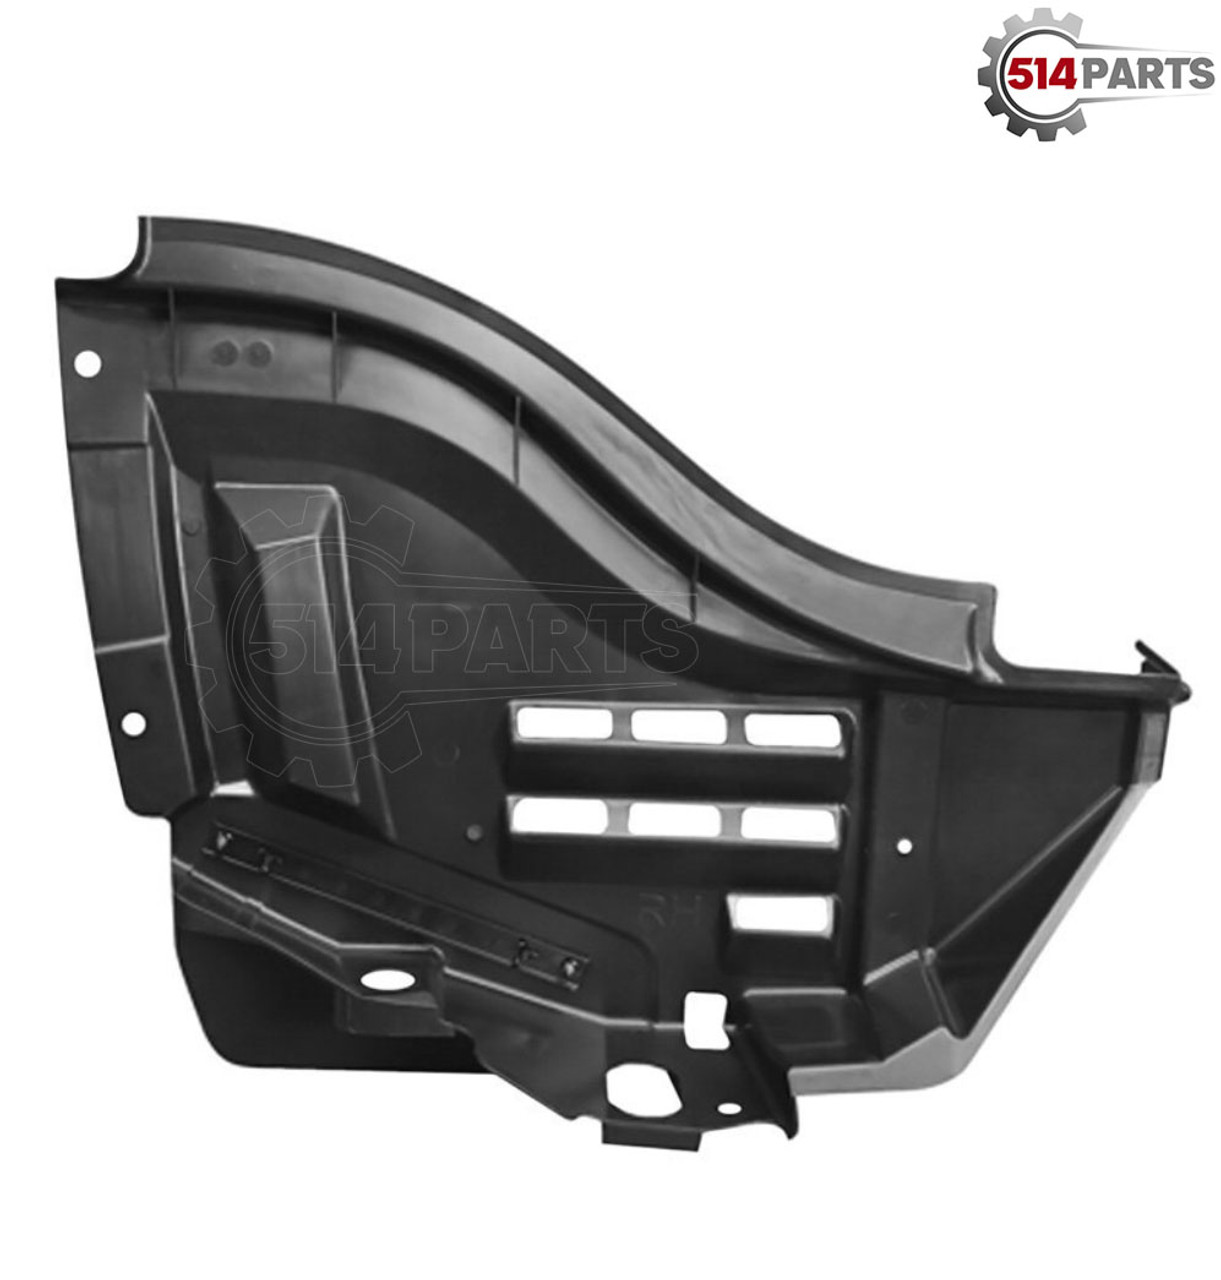 2014 - 2019 TOYOTA TUNDRA FENDER LINER FRONT SECTION - FAUSSE AILE SECTION AVANT